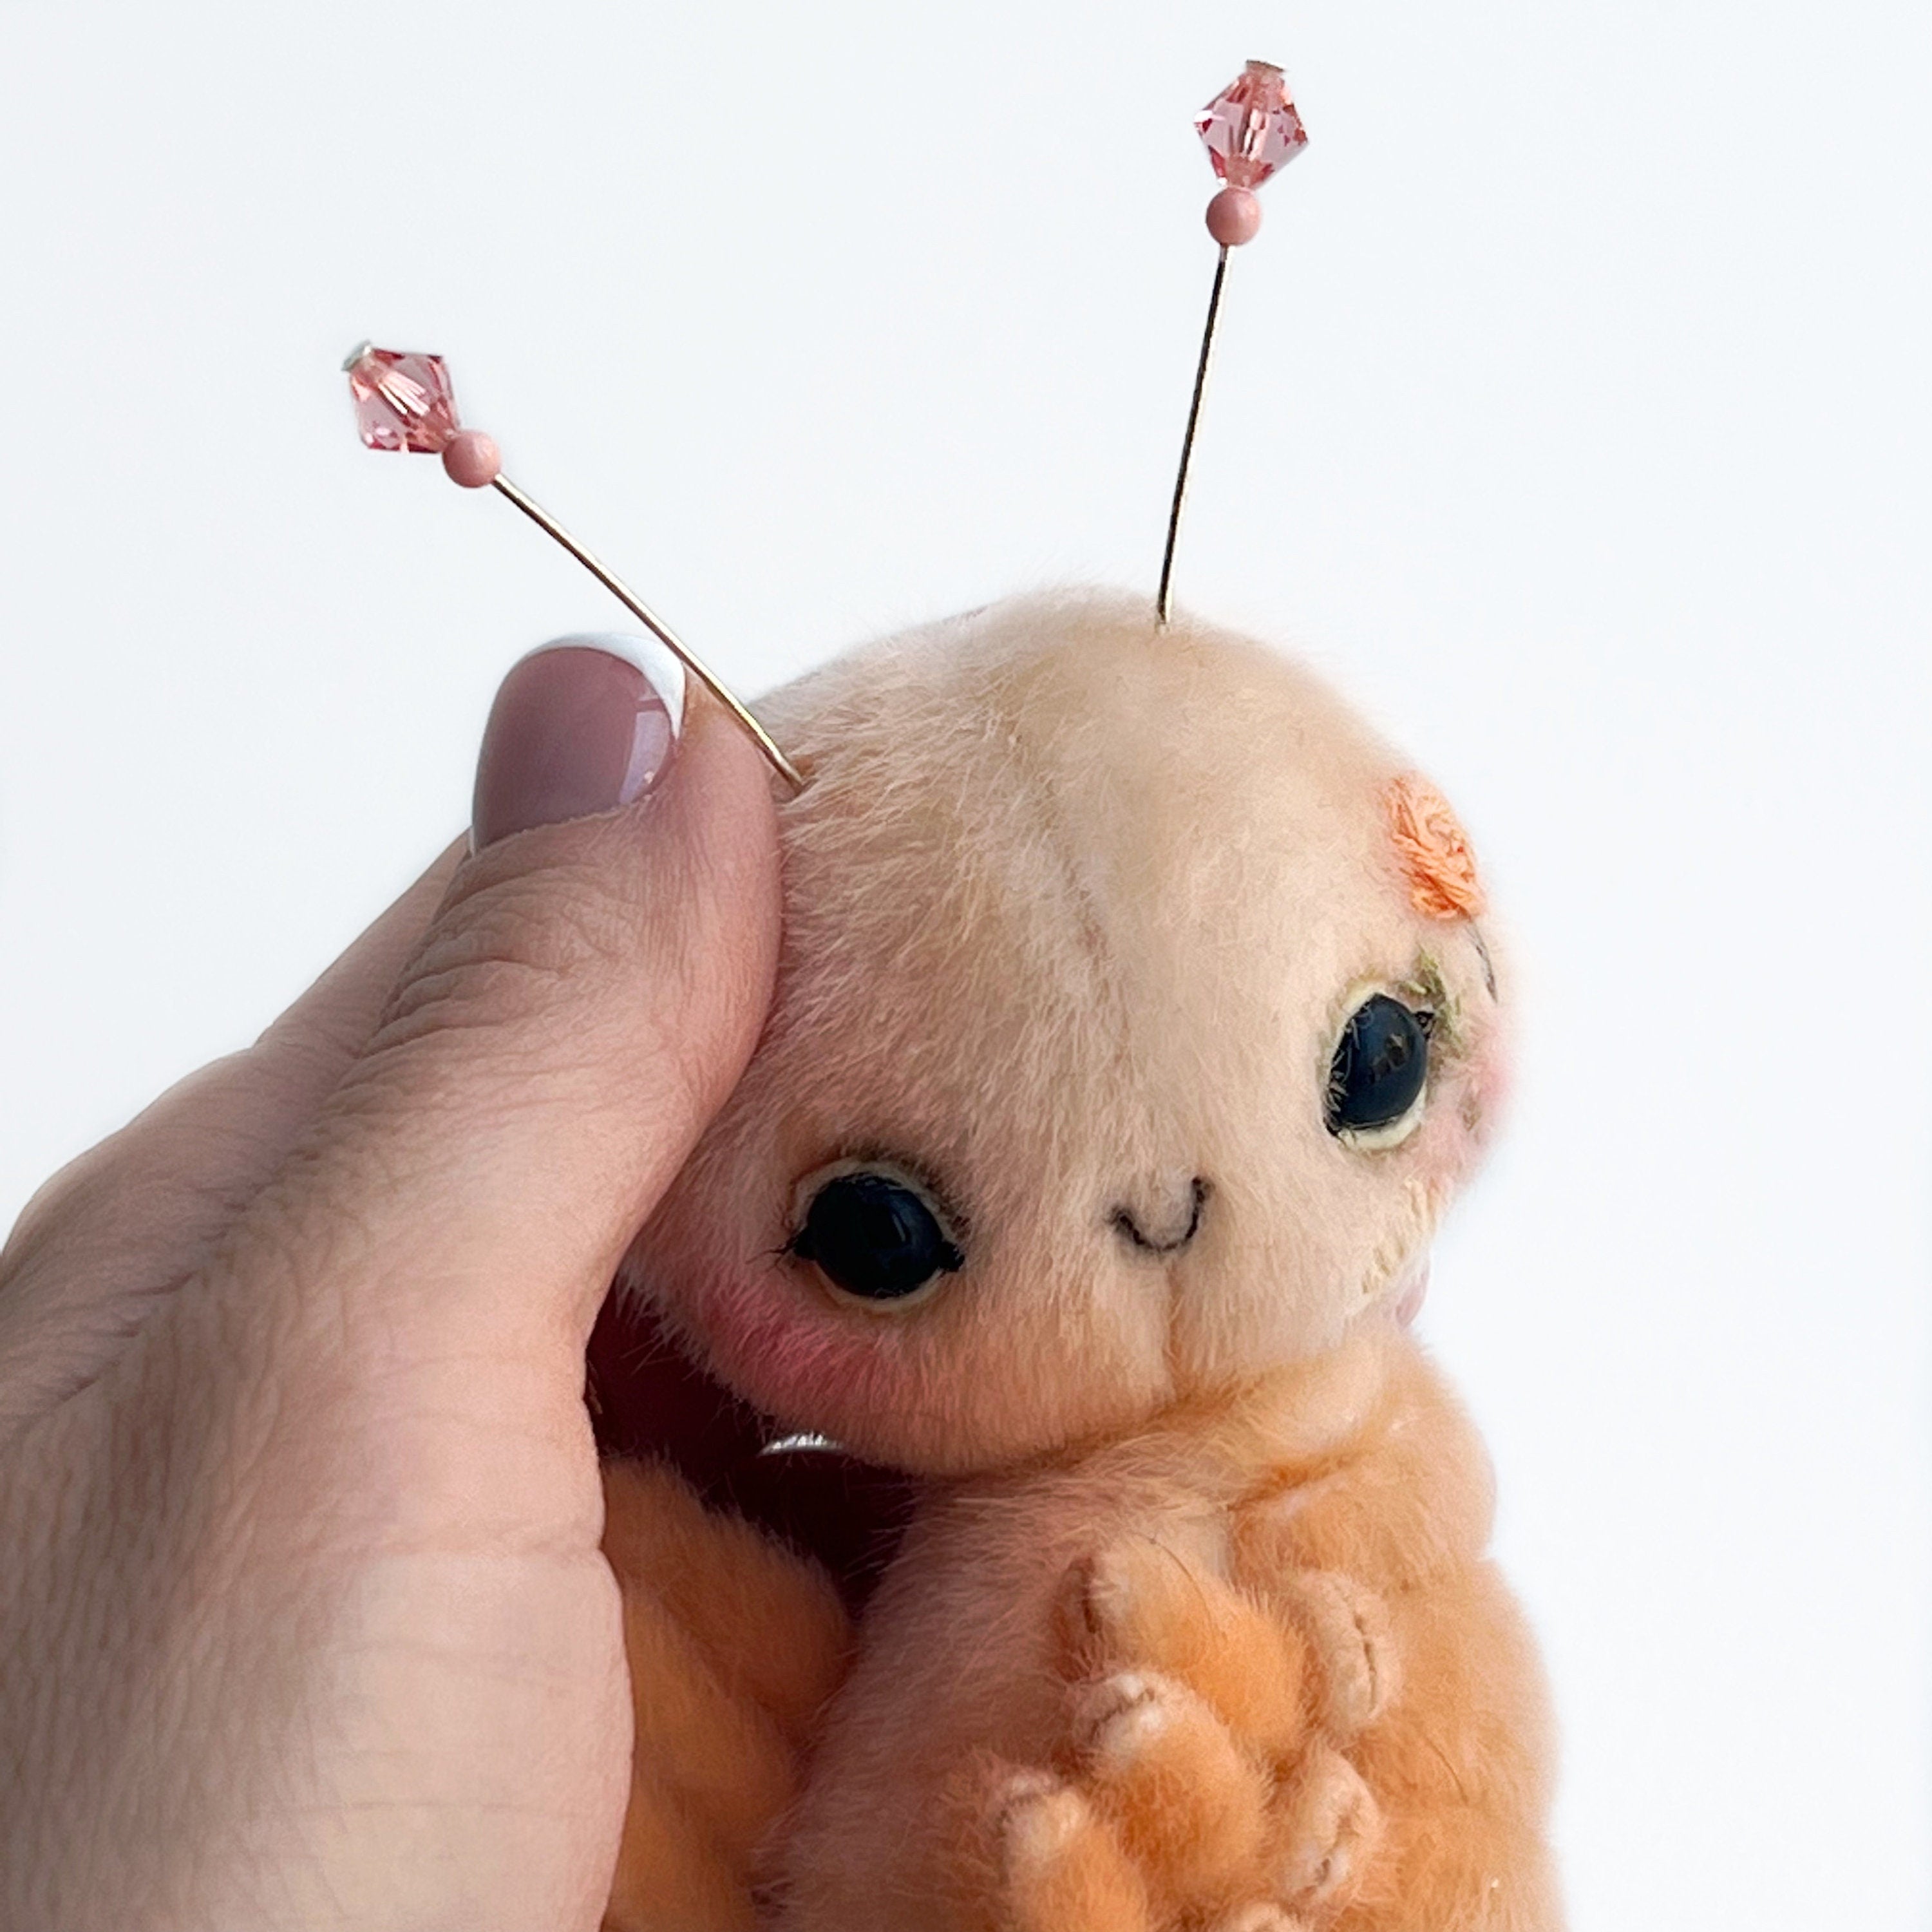 Shrimp PDF sewing pattern, Video tutorial DIY stuffed toy pattern kids Bestseller easy to sew gift for creative friend